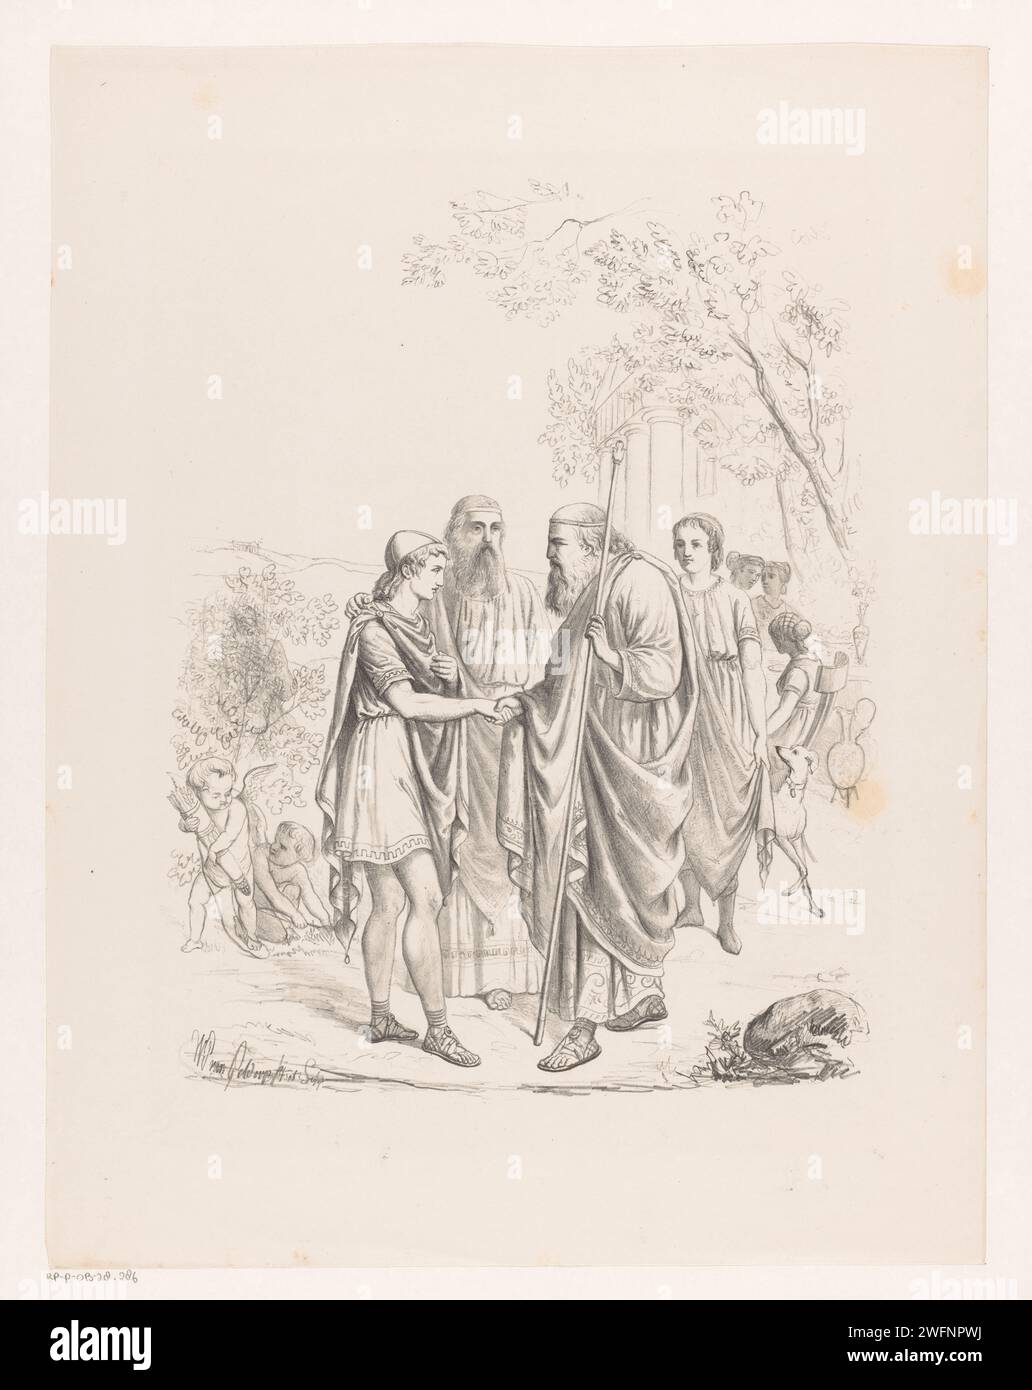 Telemachus visits Nestor on the island of Pylon, Wilhelmus Petrus van Geldorp, 1870 print Telemachus left home to find his father Odysseus. Athena, disguised as an old man named Mentor, accompanies him. She gives him the courage to address King Nestor. Rotterdam paper  Telemachus' encounter with Nestor at the sea-shore during a sacrifice to Neptune. shaking hands, 'dextrarum junctio'. Nestor Stock Photo